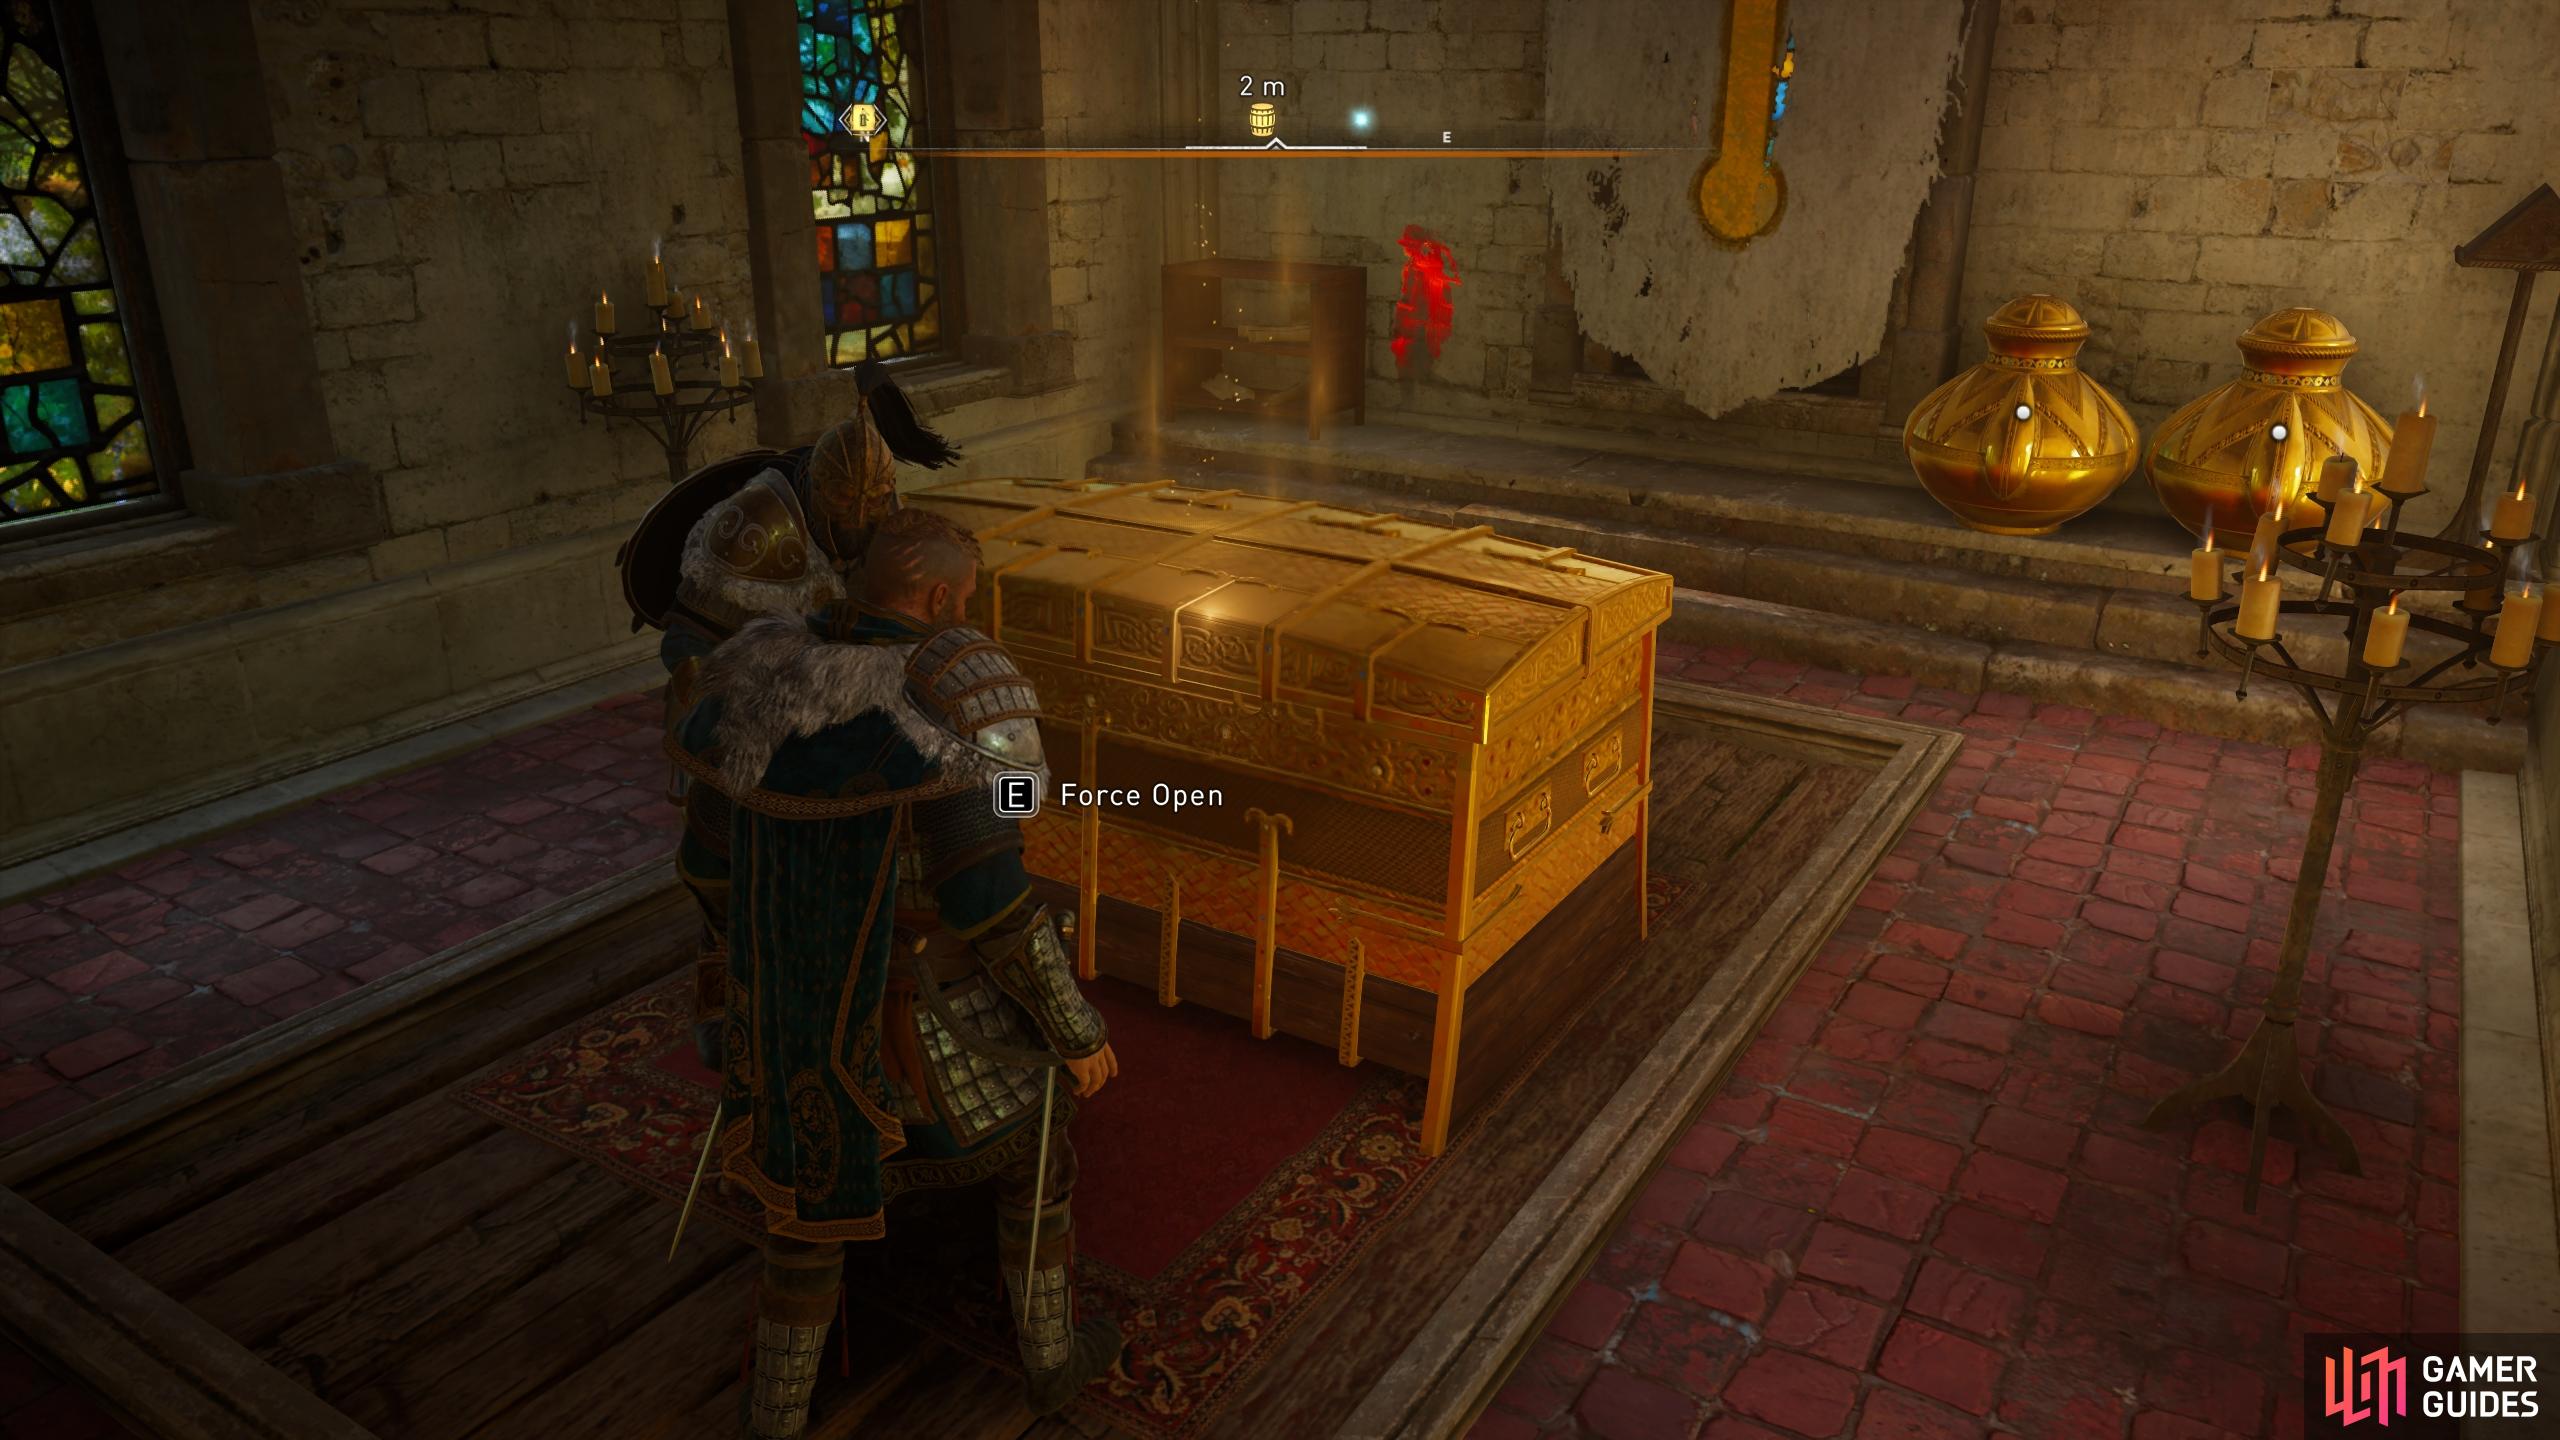 You'll find the chest behind the altar within the church.